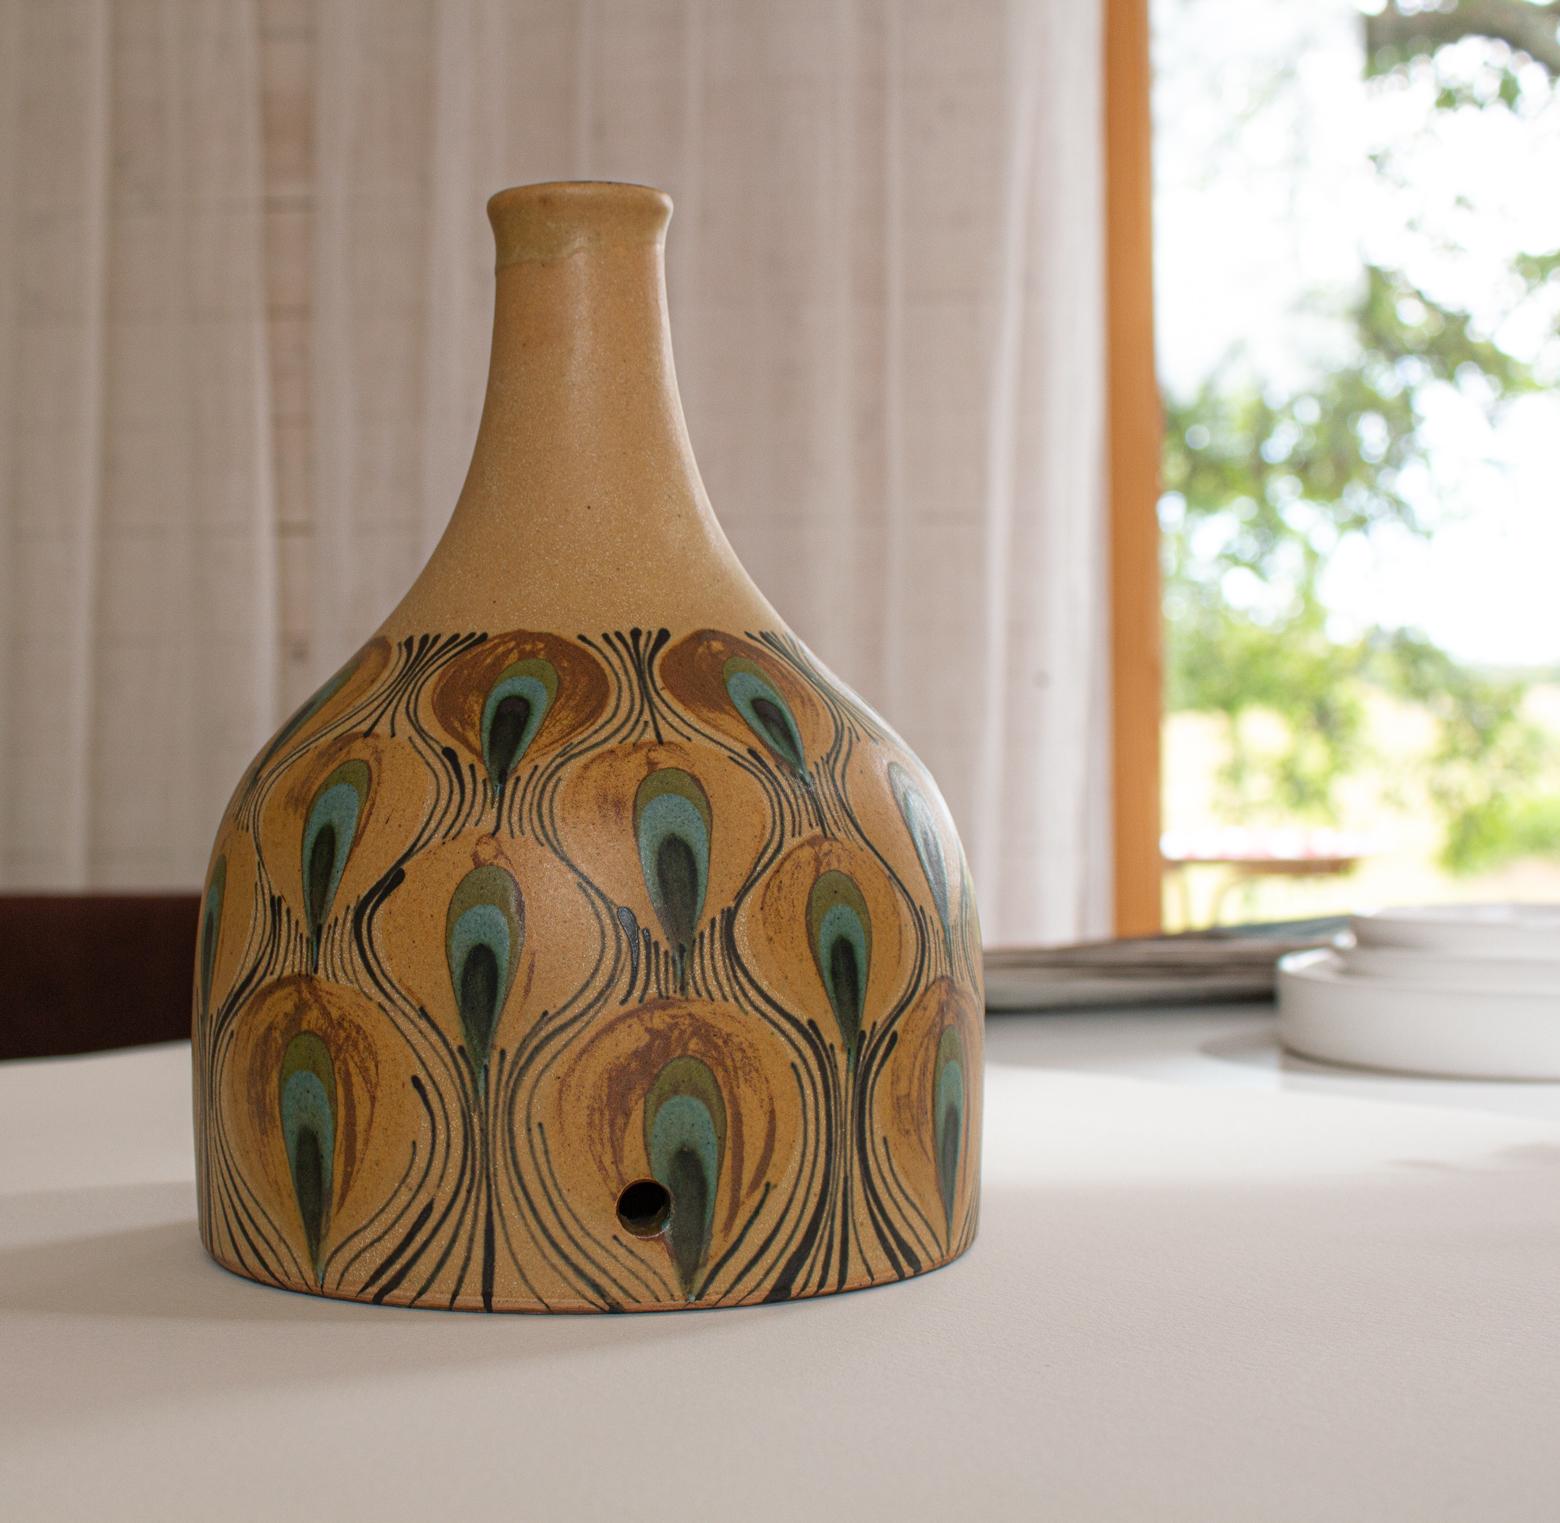 Mid-Century Modern Danish Table Lamp with Peacock Pattern by Margrethe Dybdahl For Sale 2